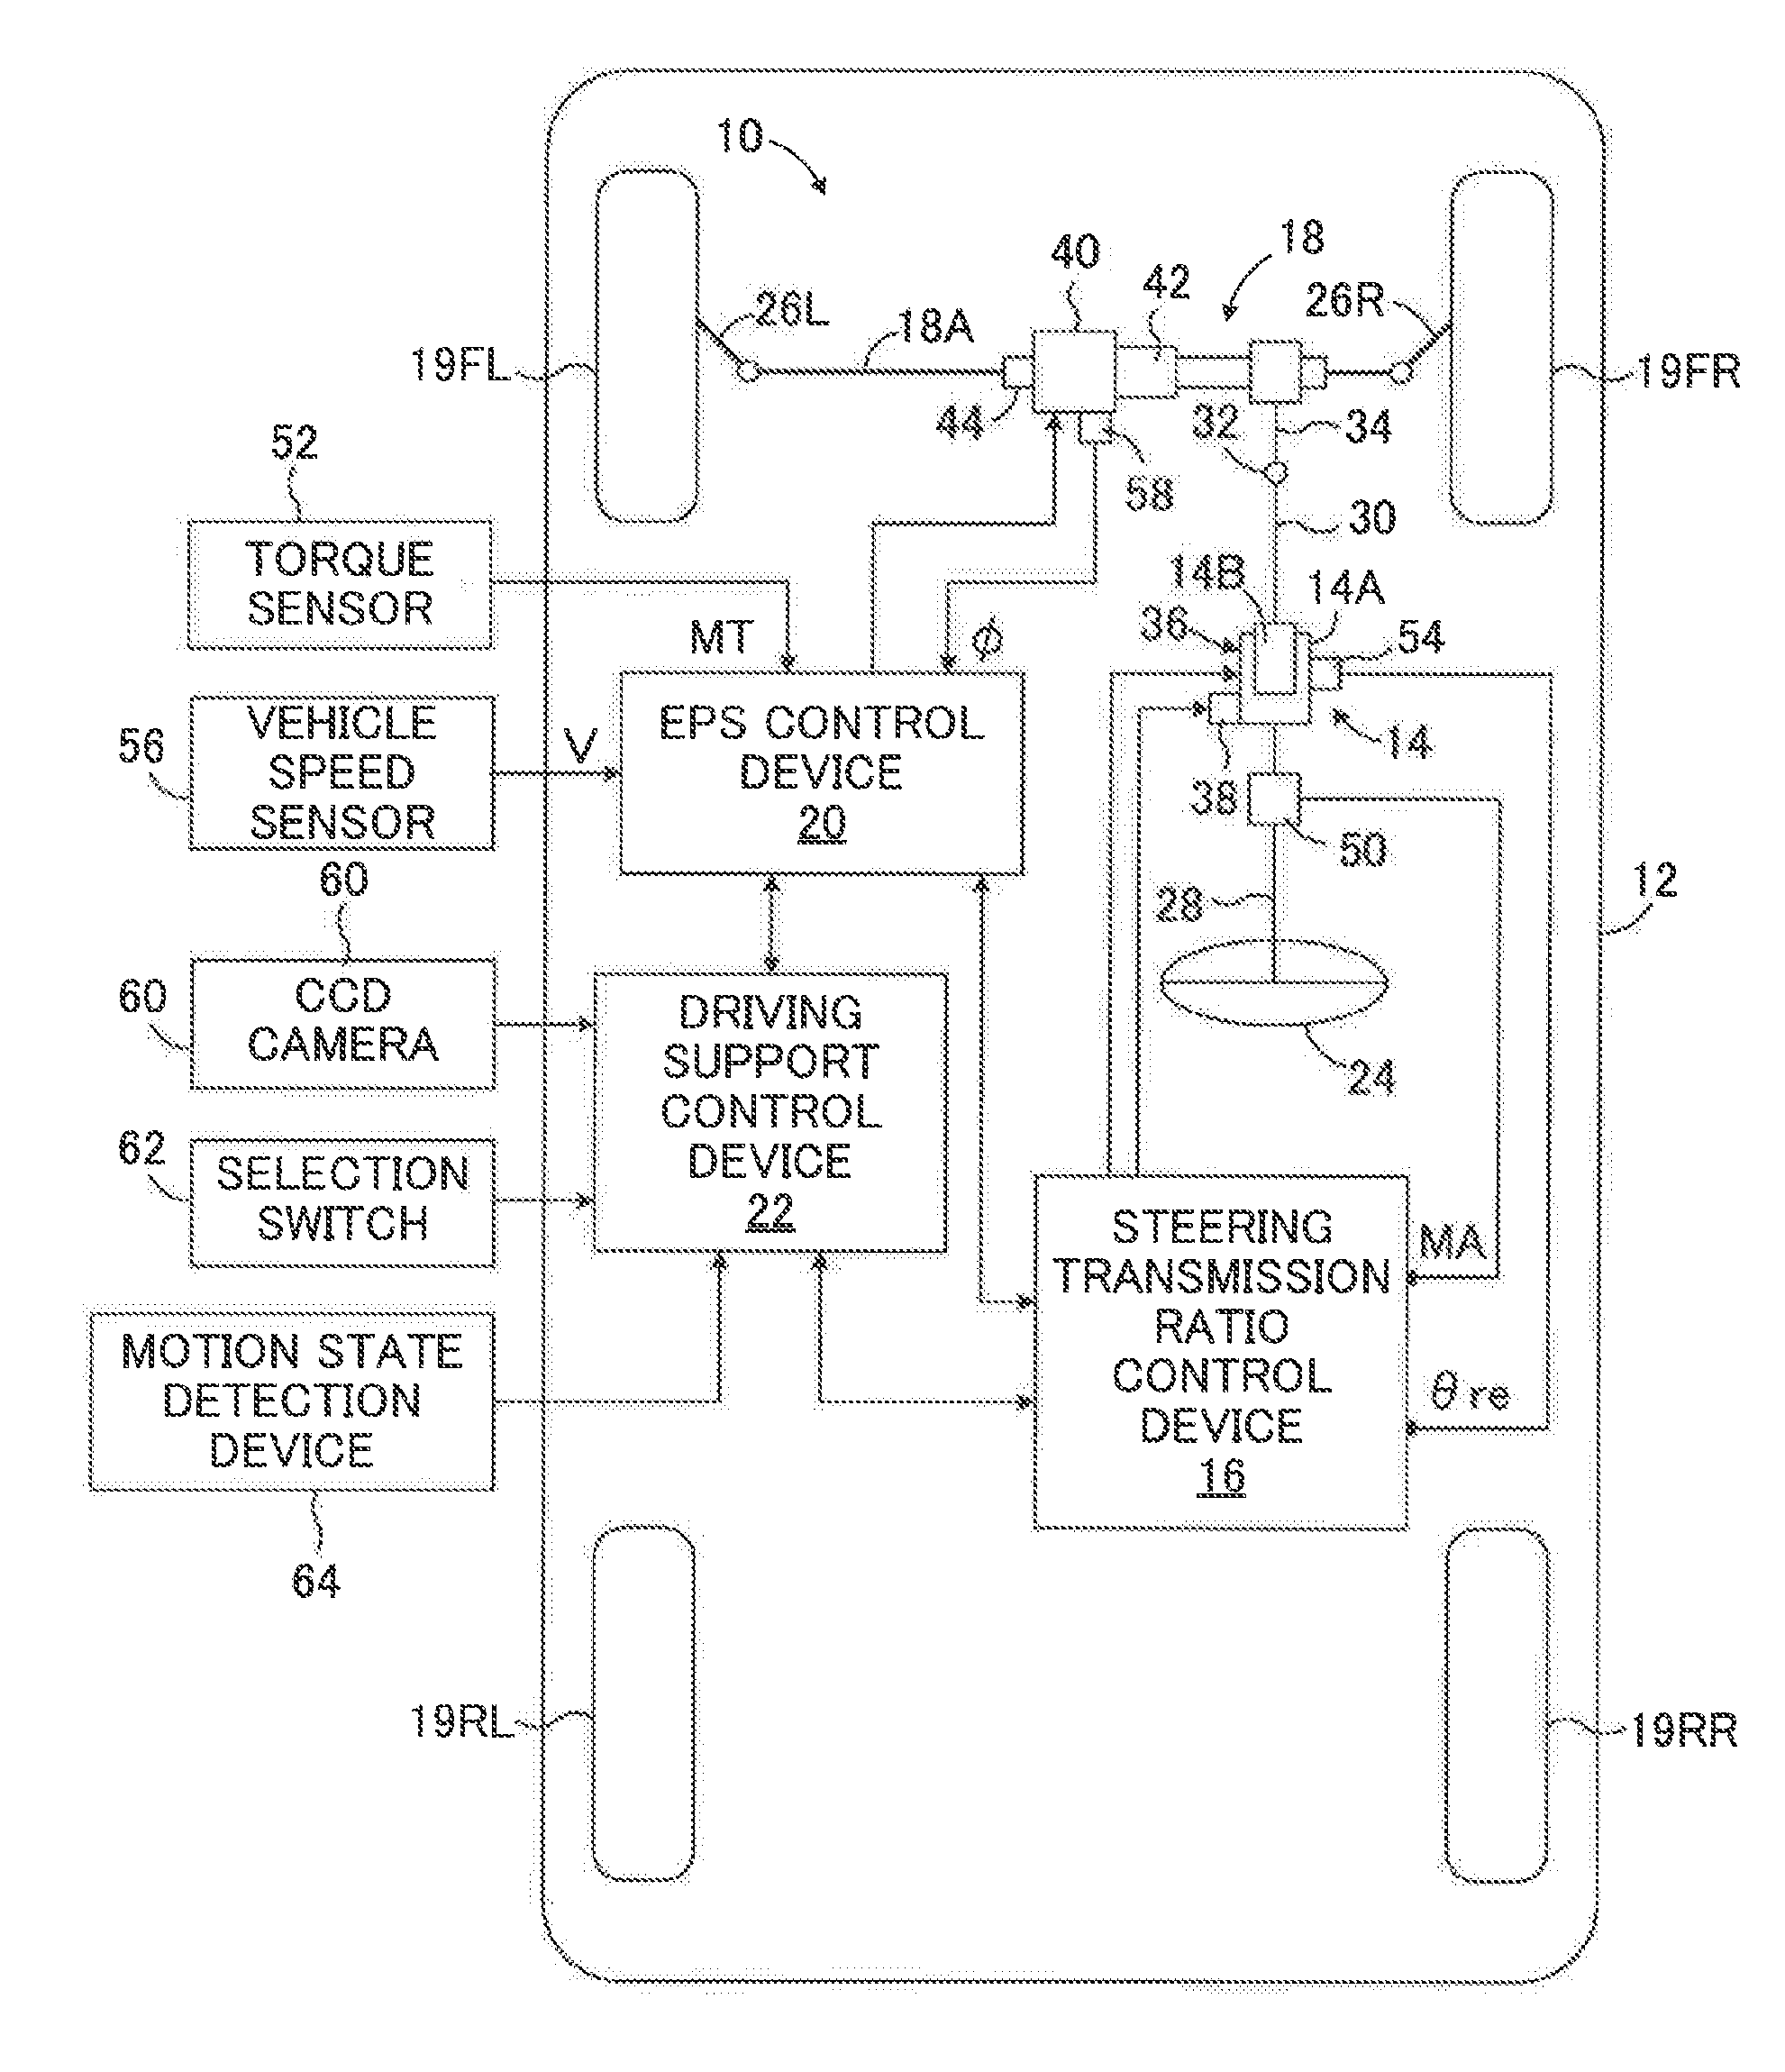 Travel control device for vehicle